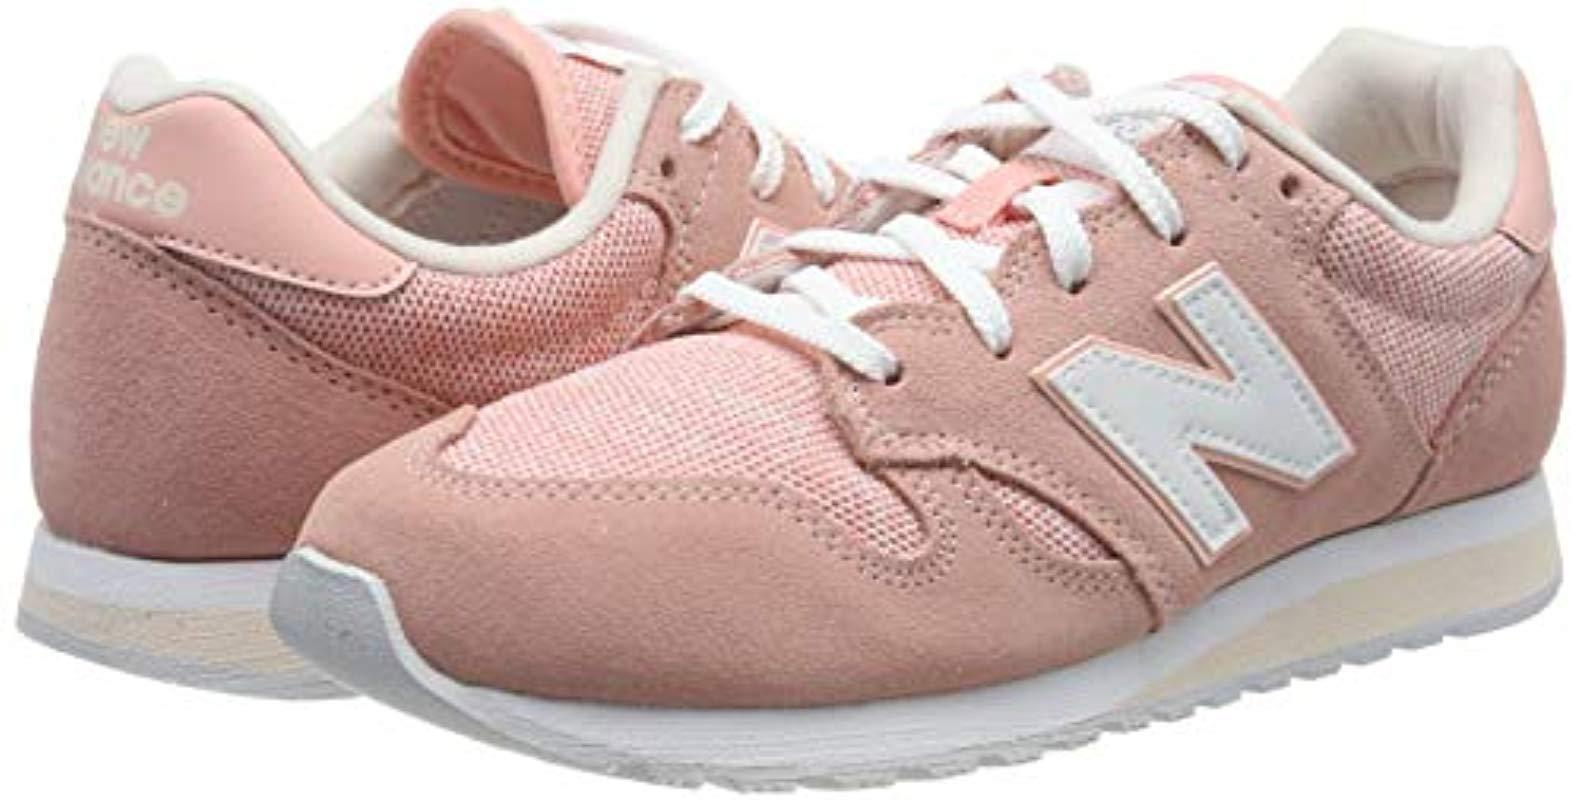 New Balance Lace 520 V1 Trainers in Pink | Lyst